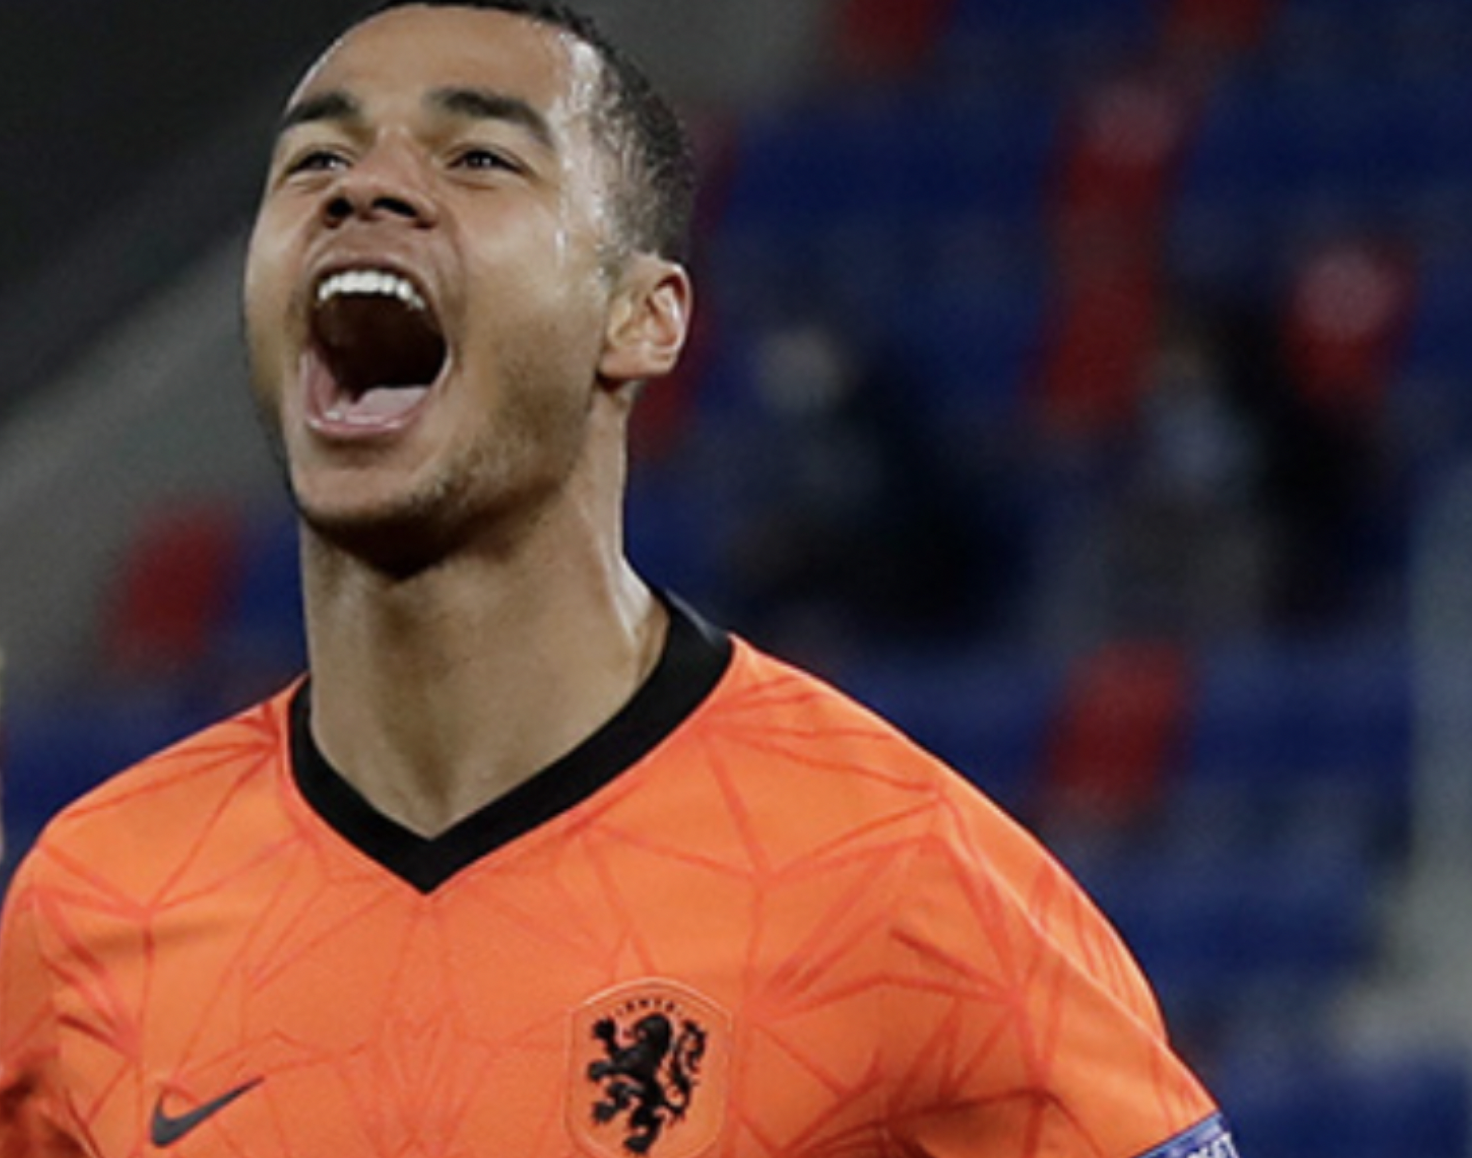 Arsenal boss Arteta drops hint about signing exciting young Dutch winger